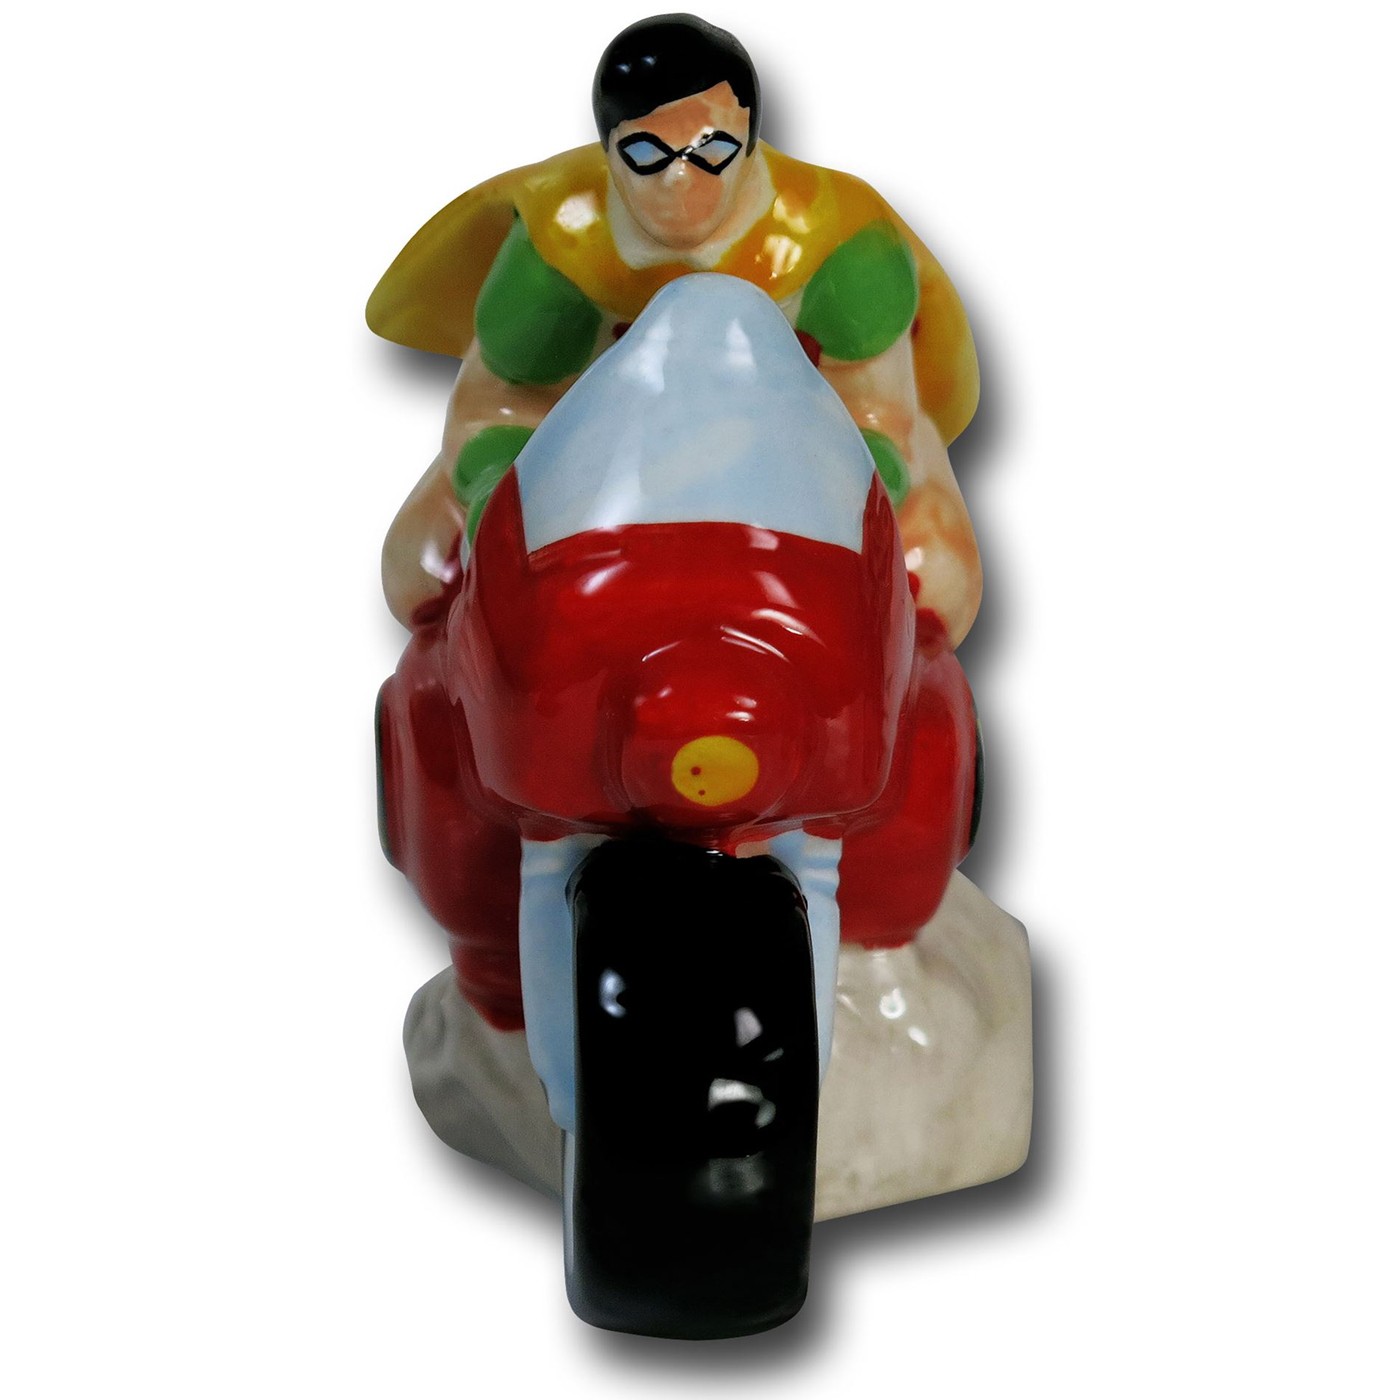 Batman and Robin Cycle Salt and Pepper Shakers